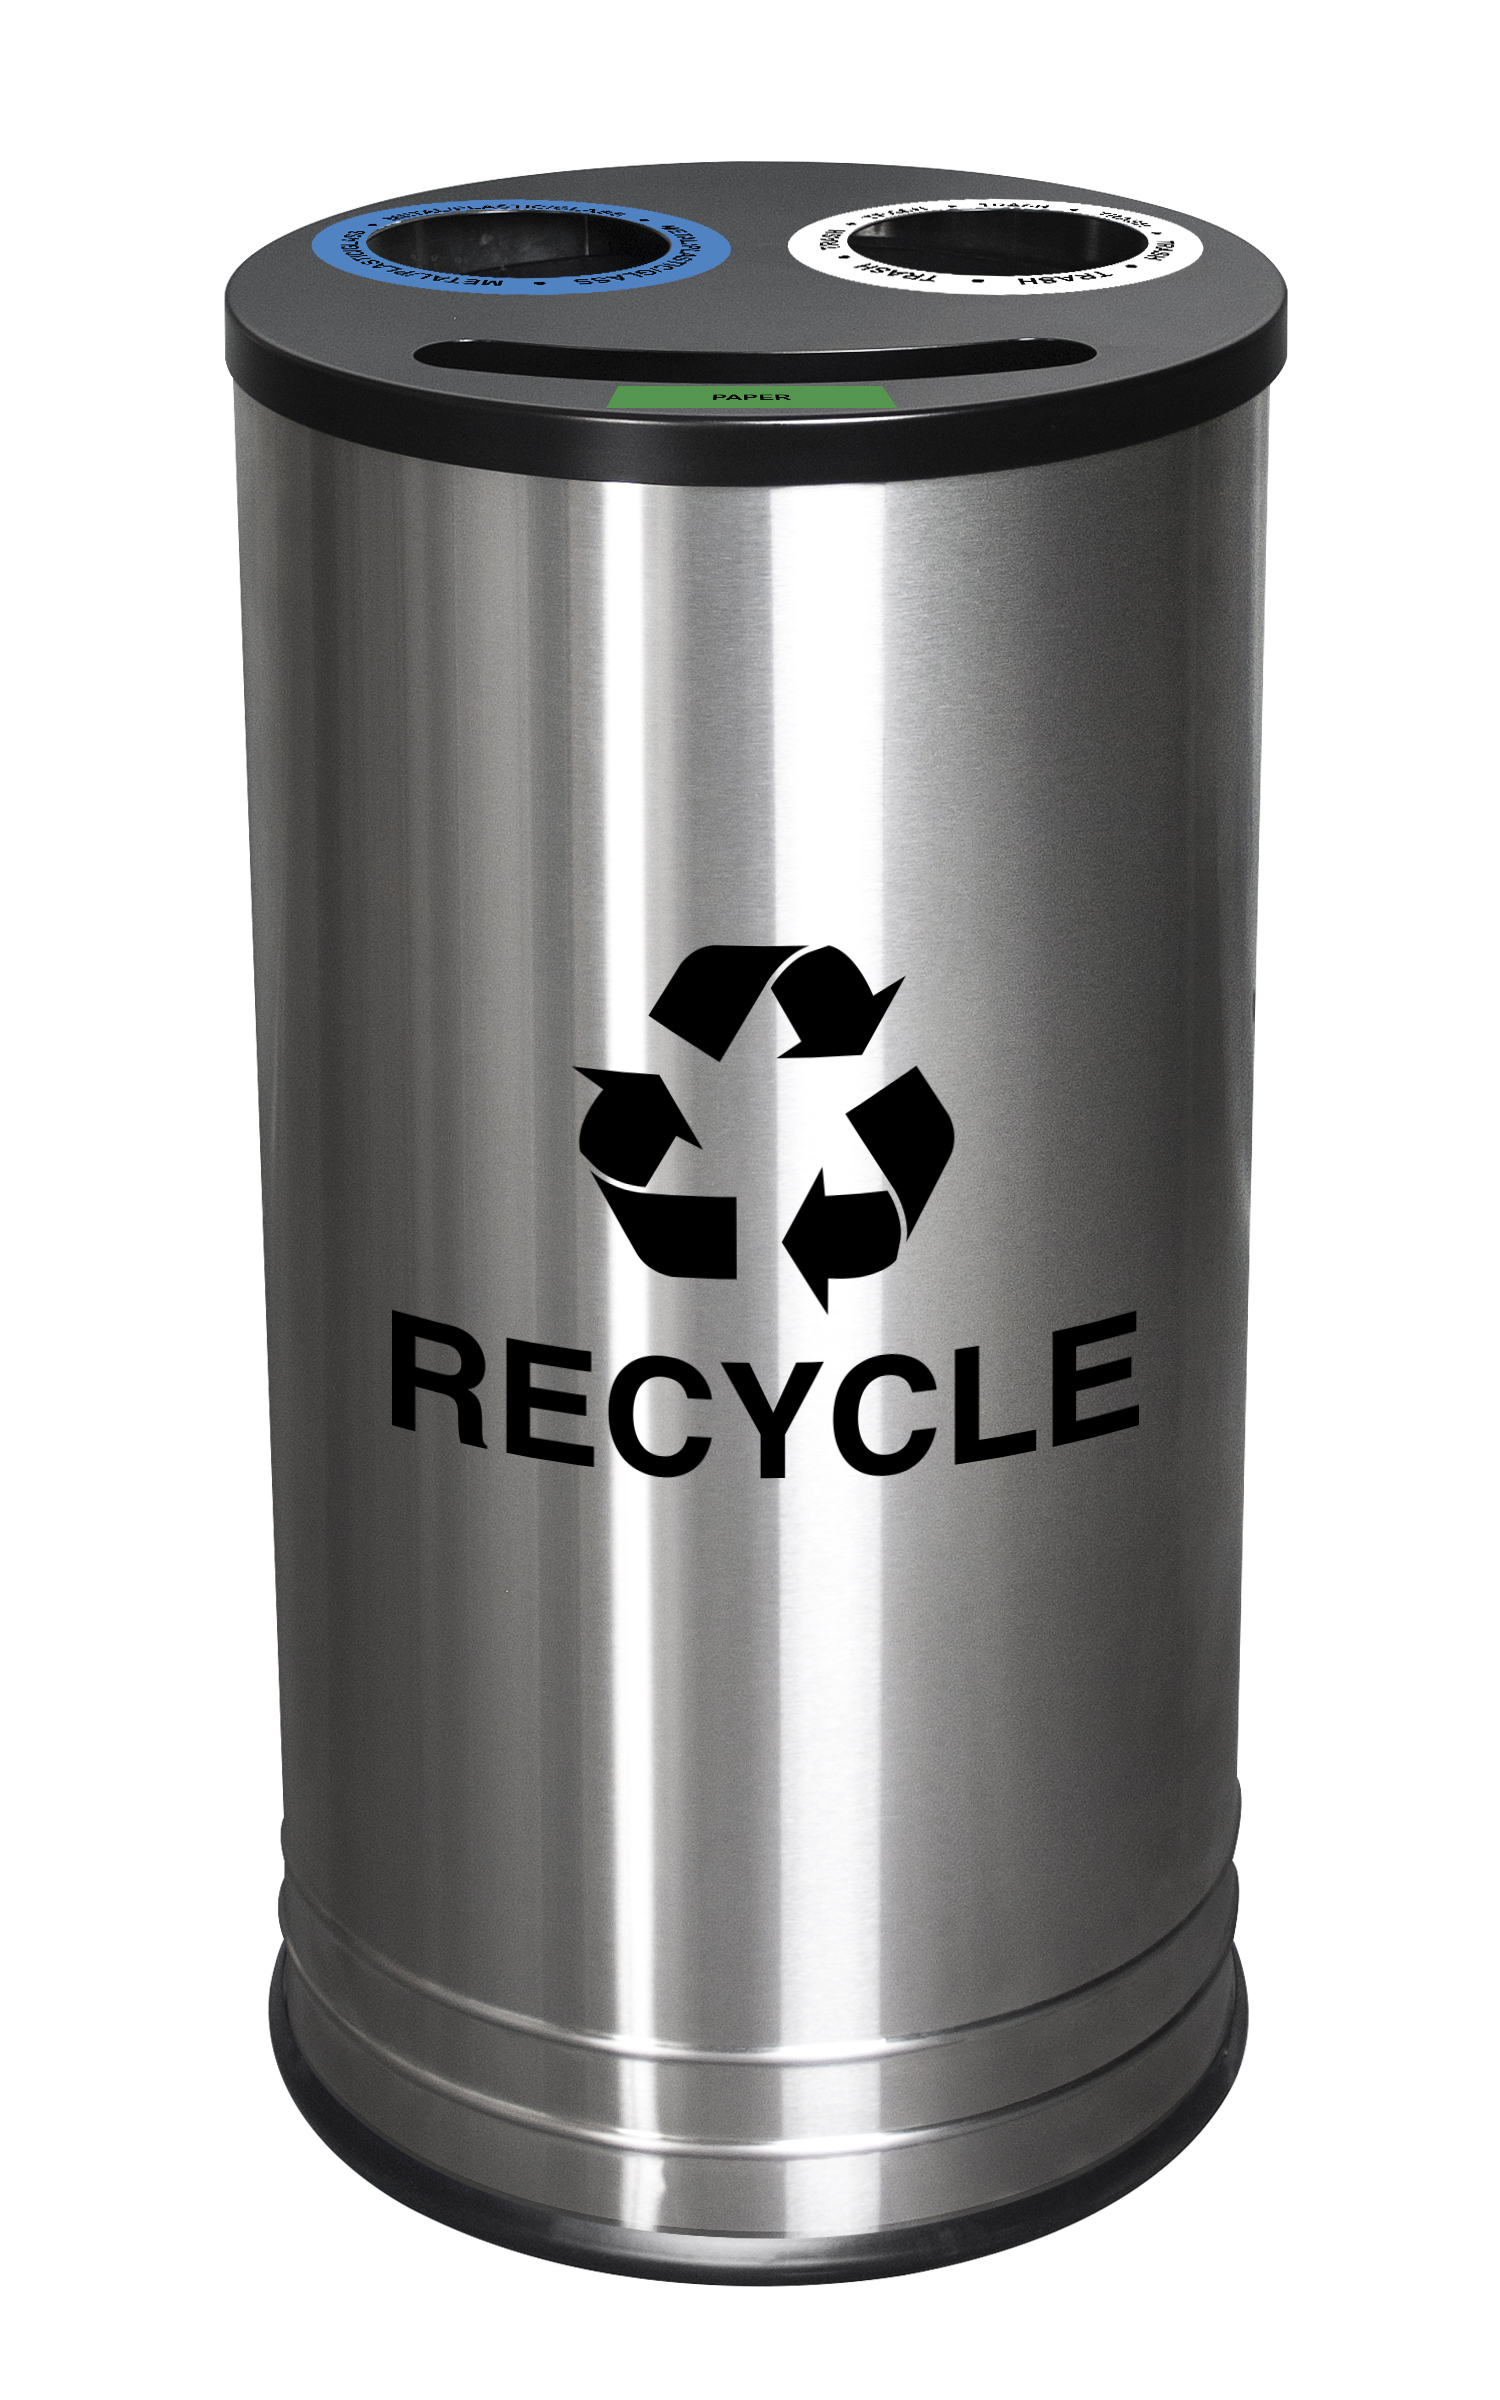 14-Gal. 3 Stream Recycling Receptacle - Stainless Steel